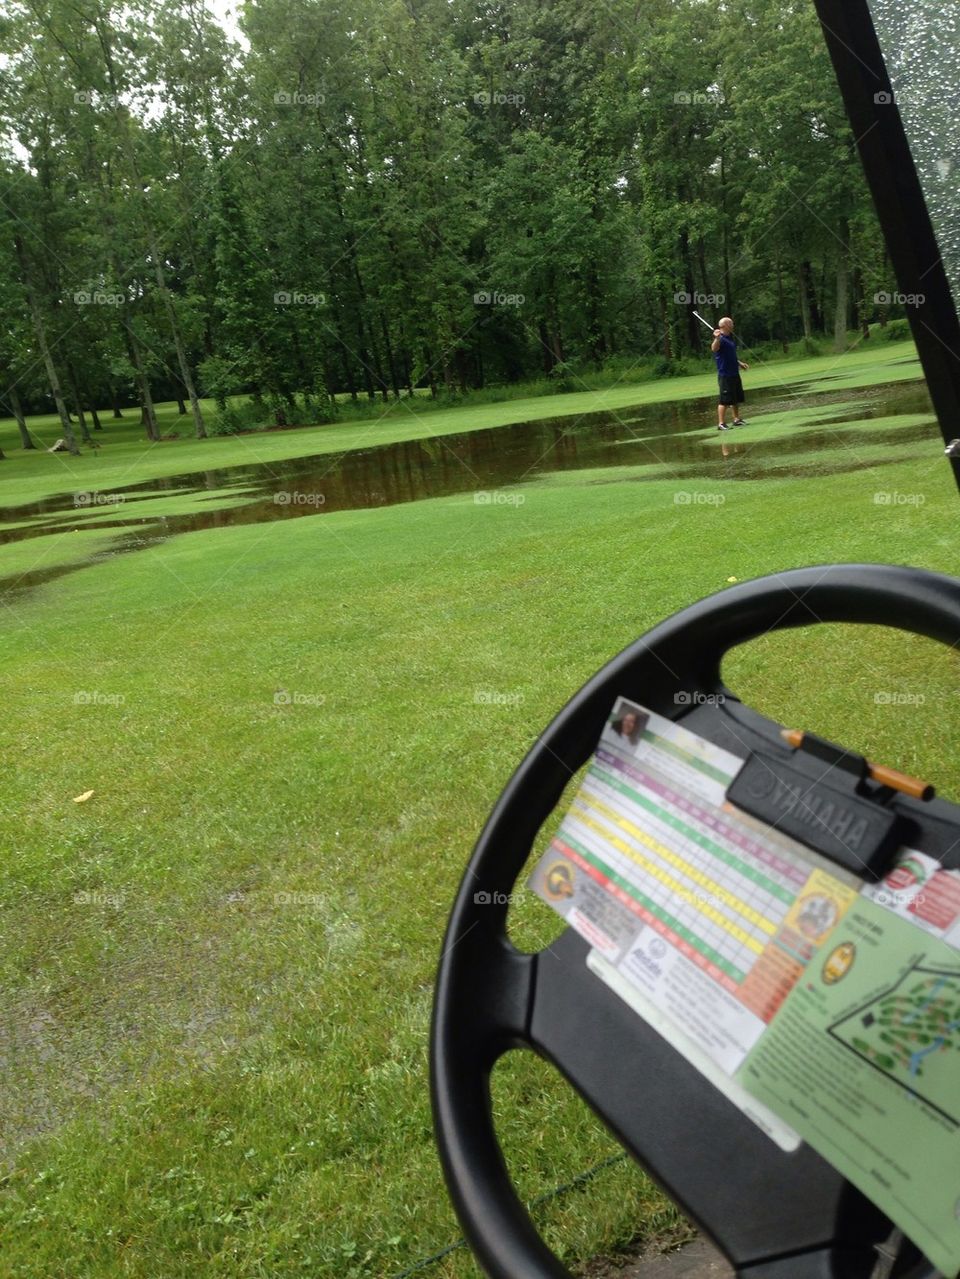 Another Day of Golf in the rain